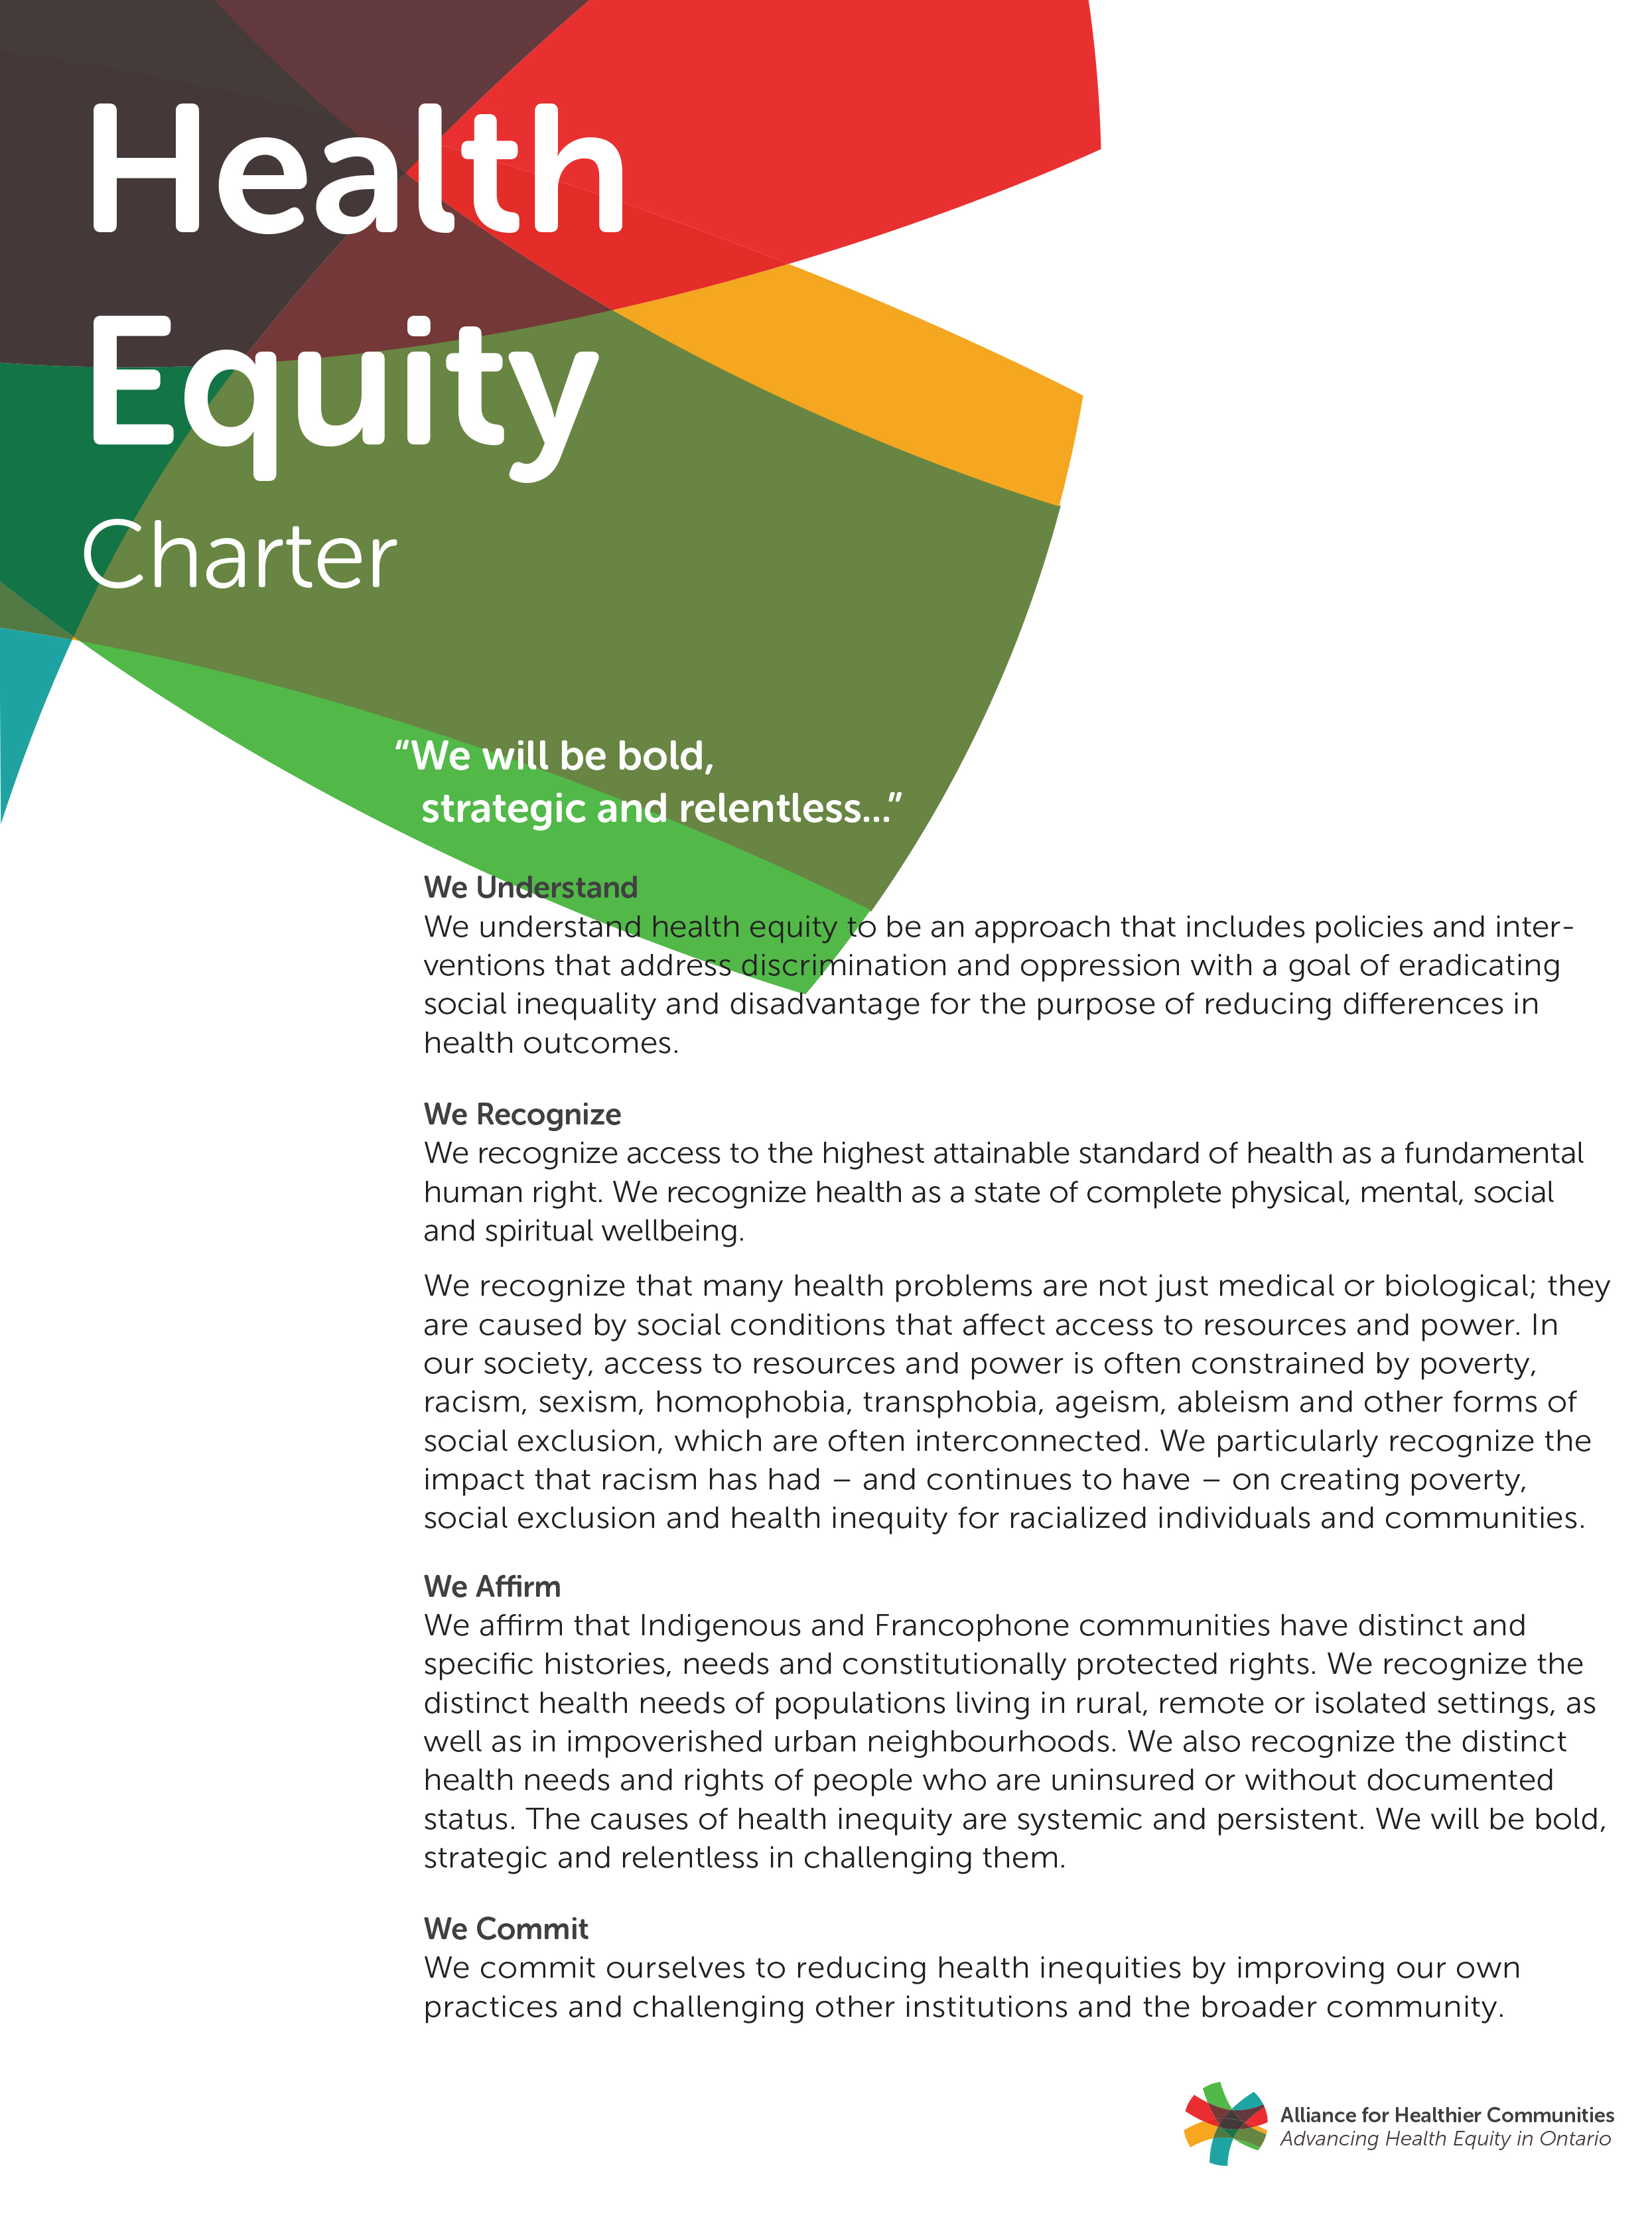 Health Equity Charter